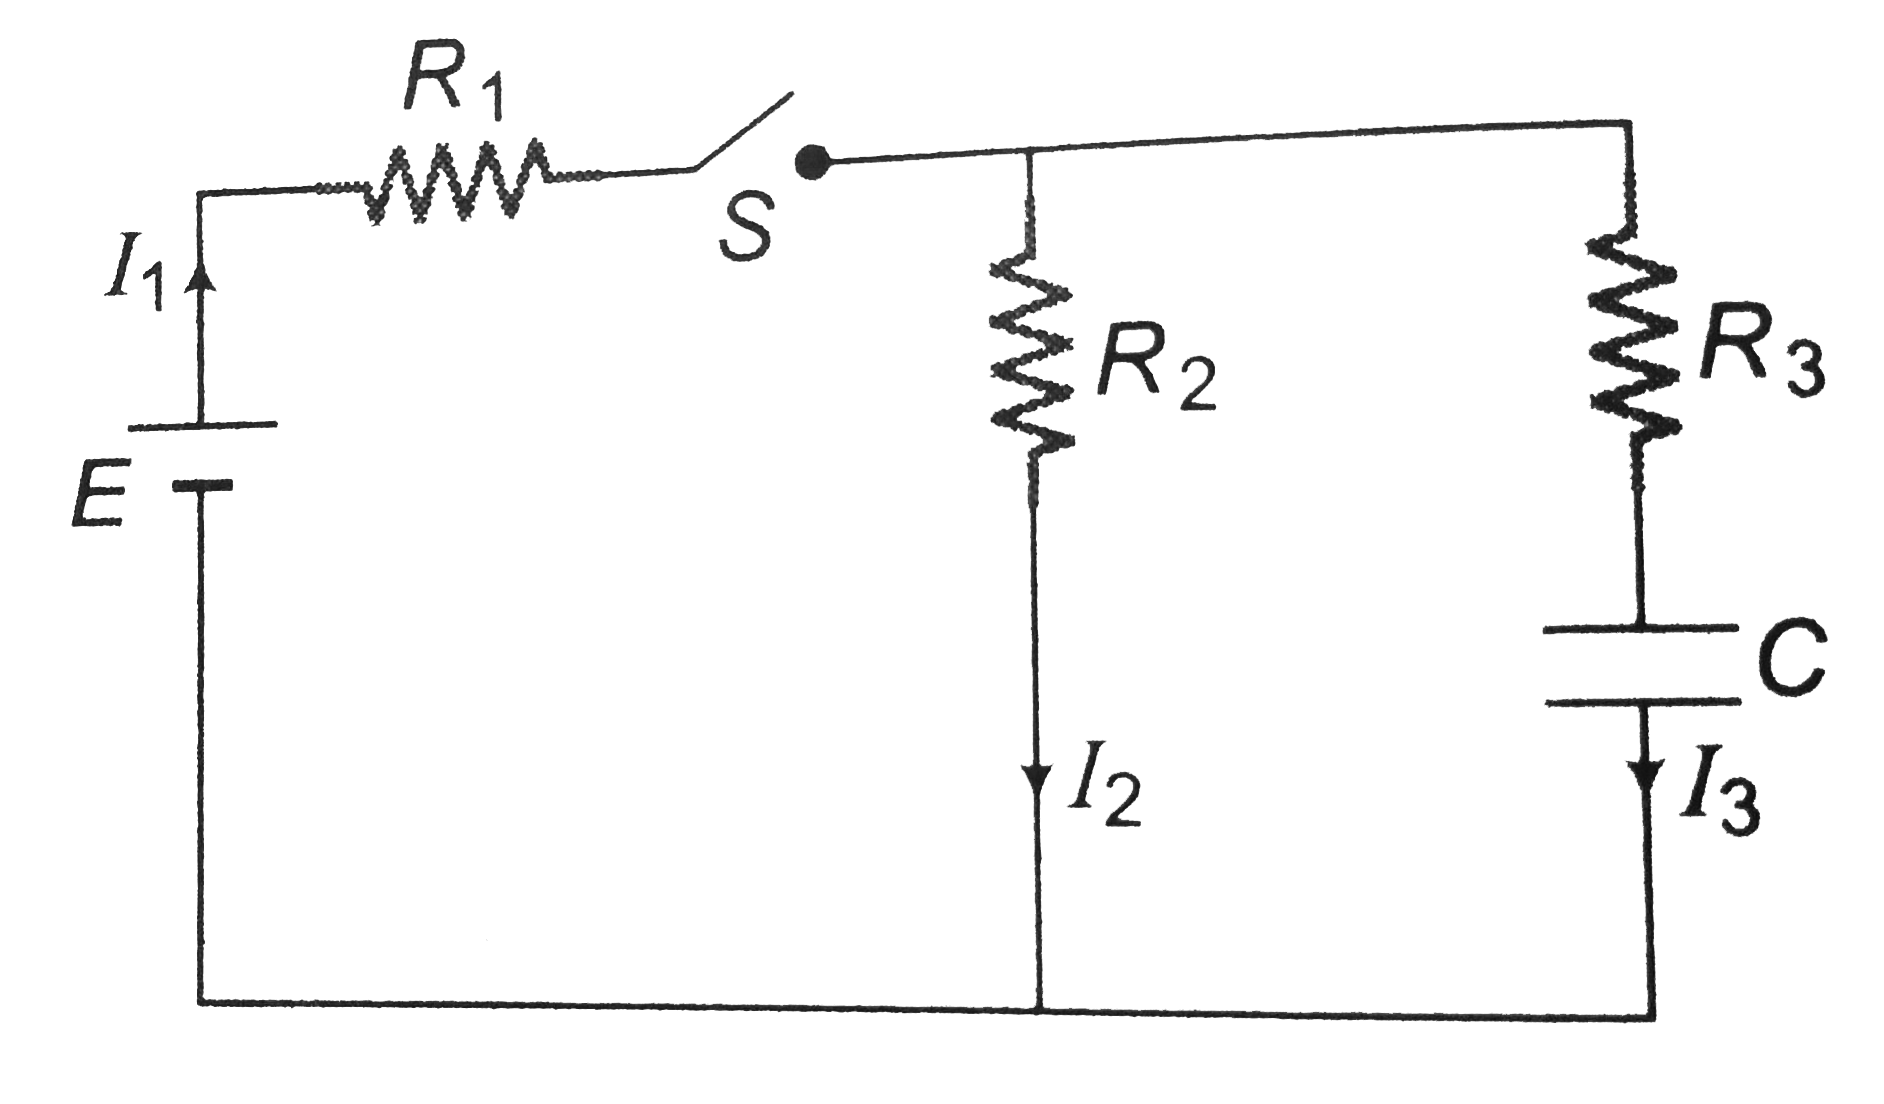 In the circuit shown, E = 18 kV, C = 10 muF,R1 = 4 MOmega, R2 = 6 MOmega , R3 = 3MOmega with C completely uncharged, switch S is suddenly closed (at t = 0).      (a) Determine the current through each resistor for t=0 and t=oo  (b) What are the values of V2 (potential difference across R2) at t = 0 and t = oo. ?  (c) Plot a graph of the potential difference V2 versus t and determine the instantaneous value of V2.